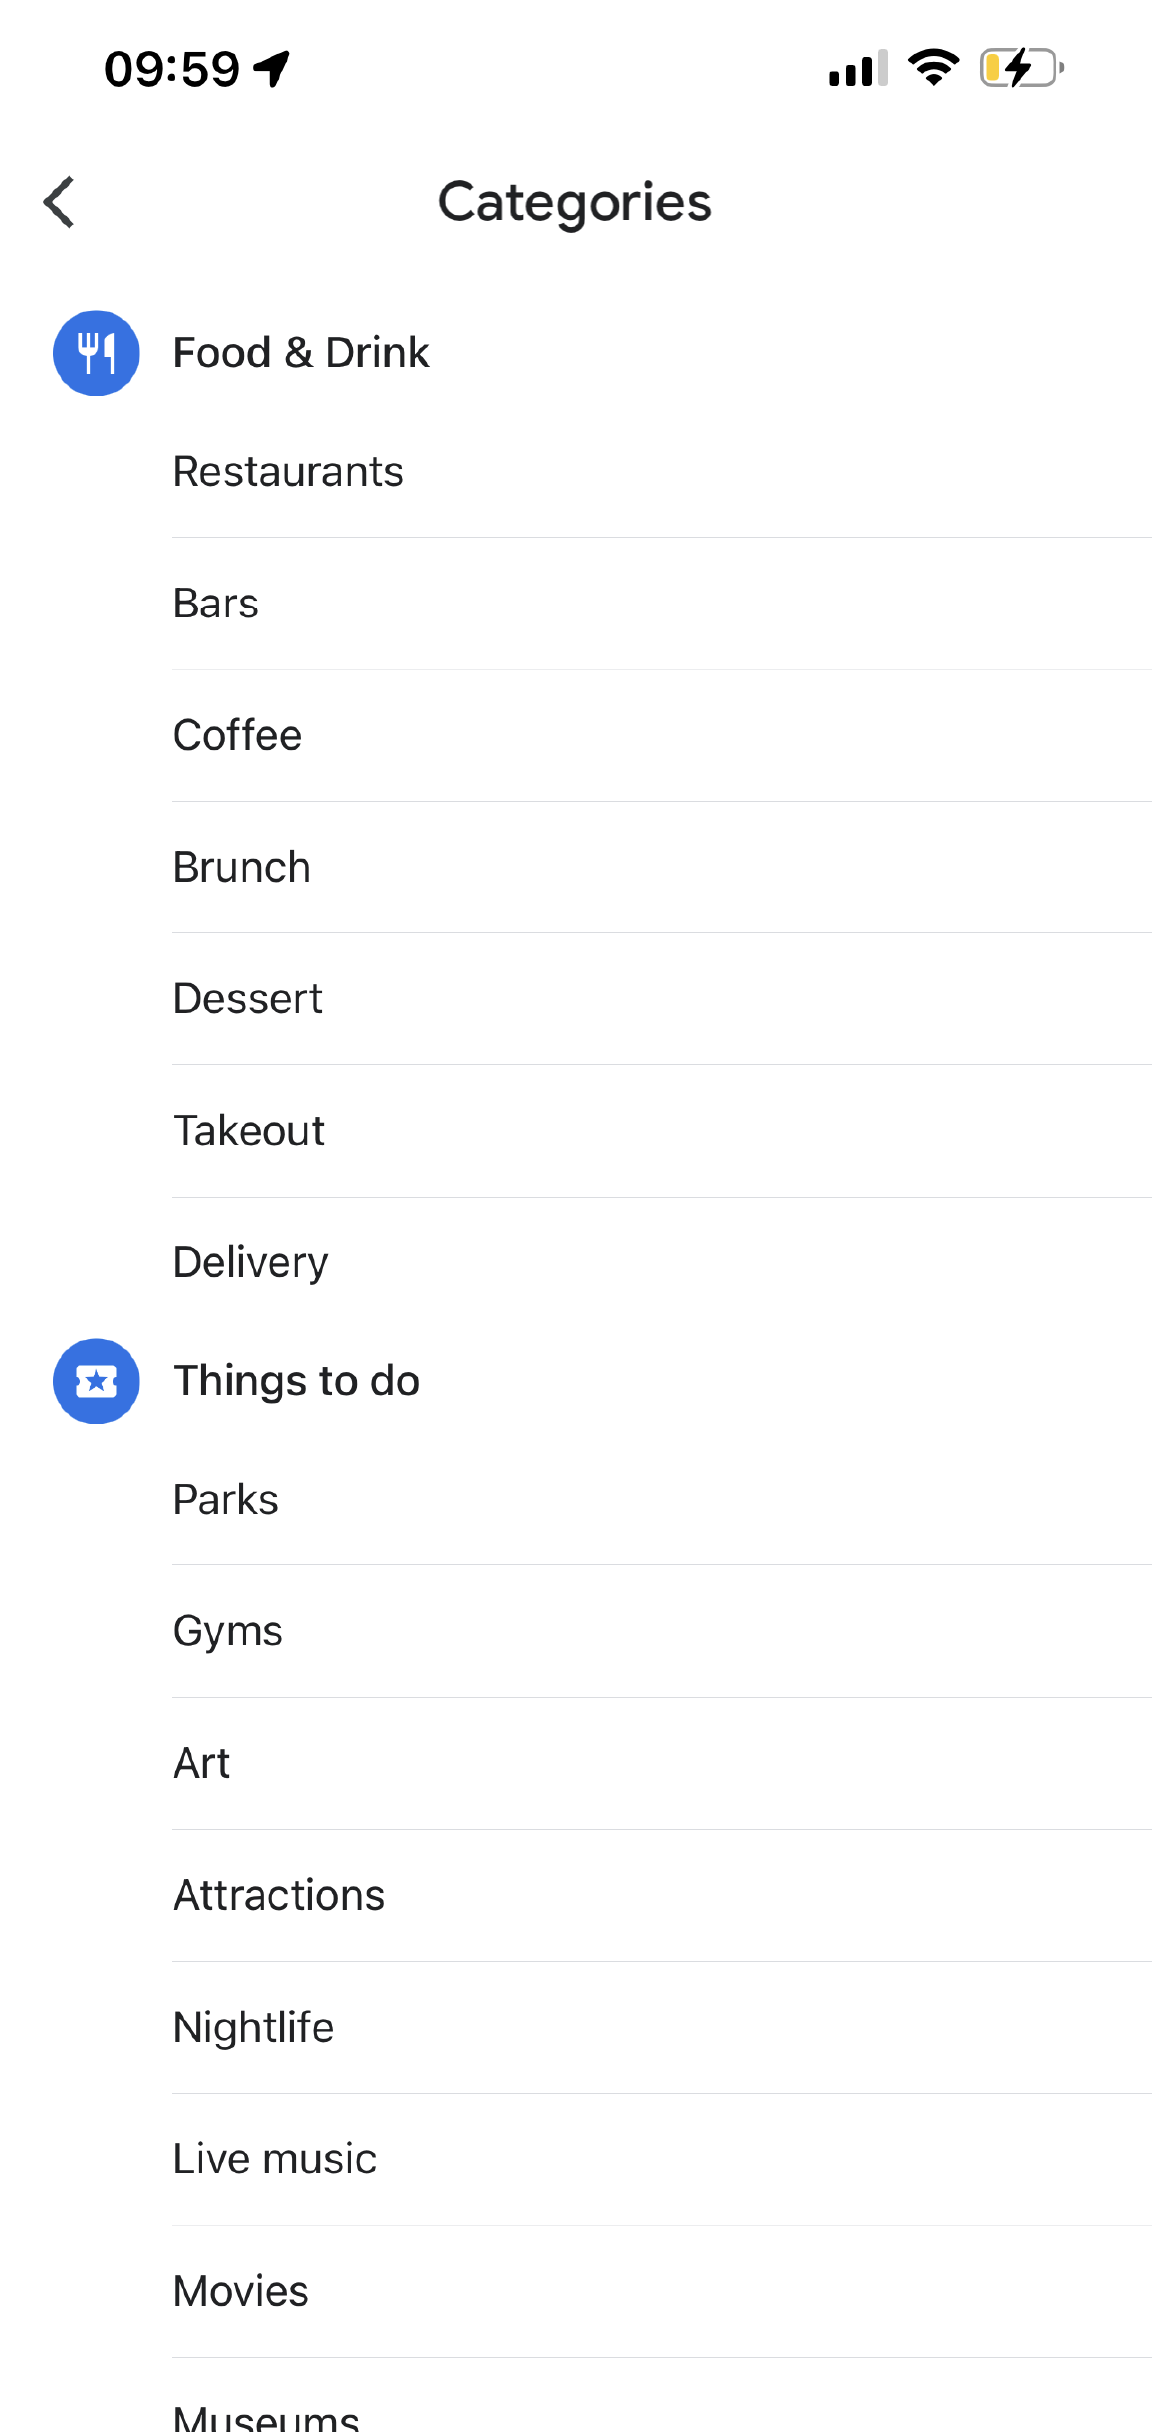 The Google Maps app displays a page title "More Categories. It shows categories such as Food & Drink, Things to do, and Shopping, with subcategories to select under each category.